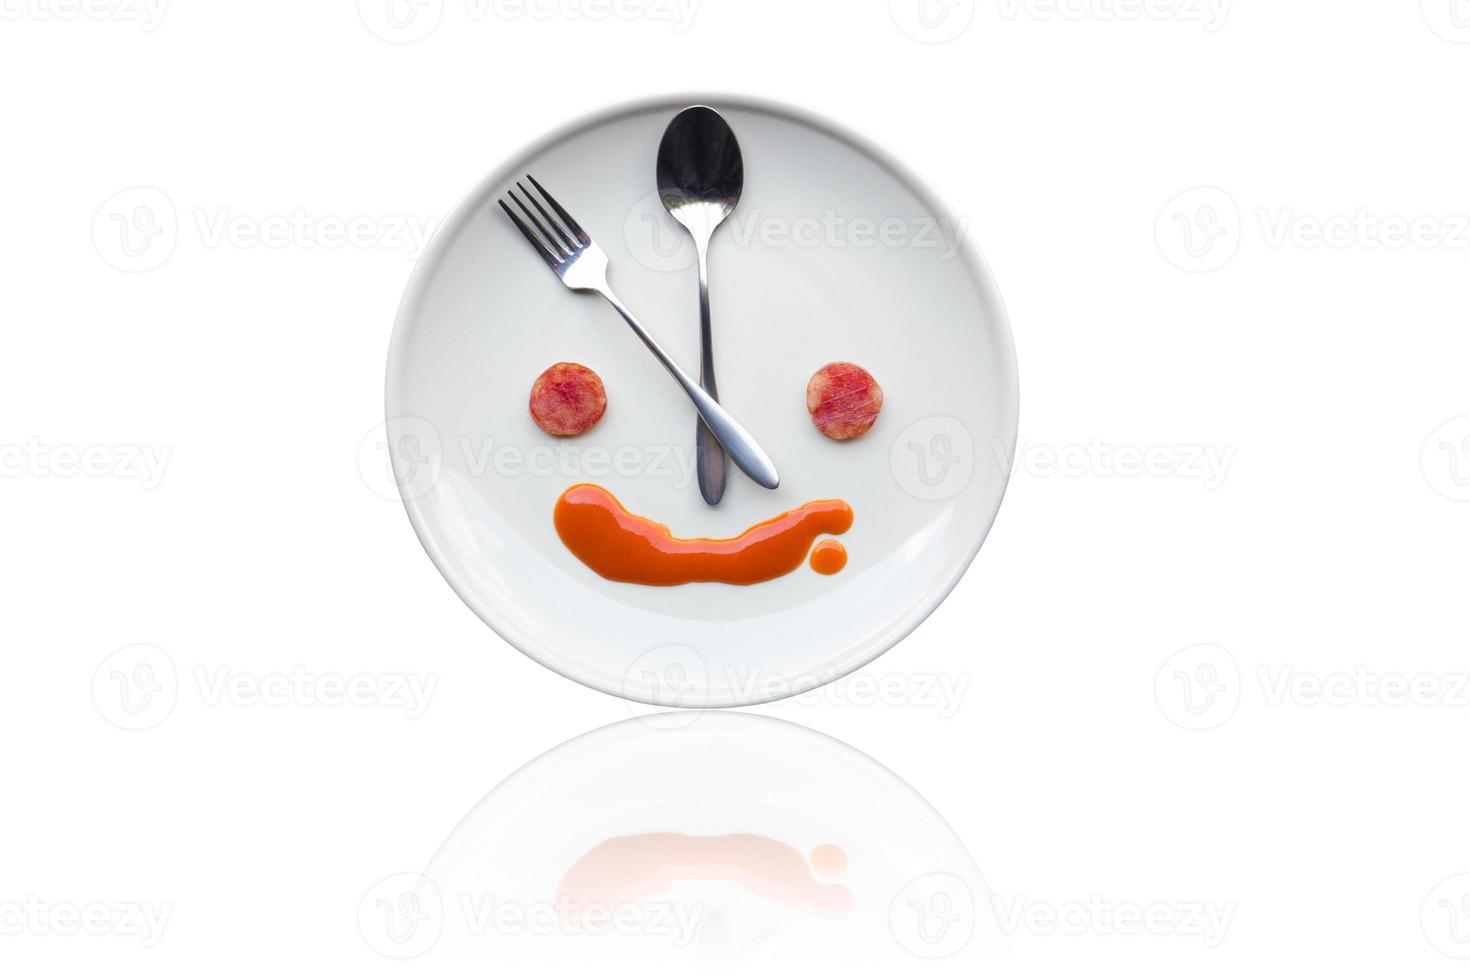 Metal spoon and fork arrange as clock face photo